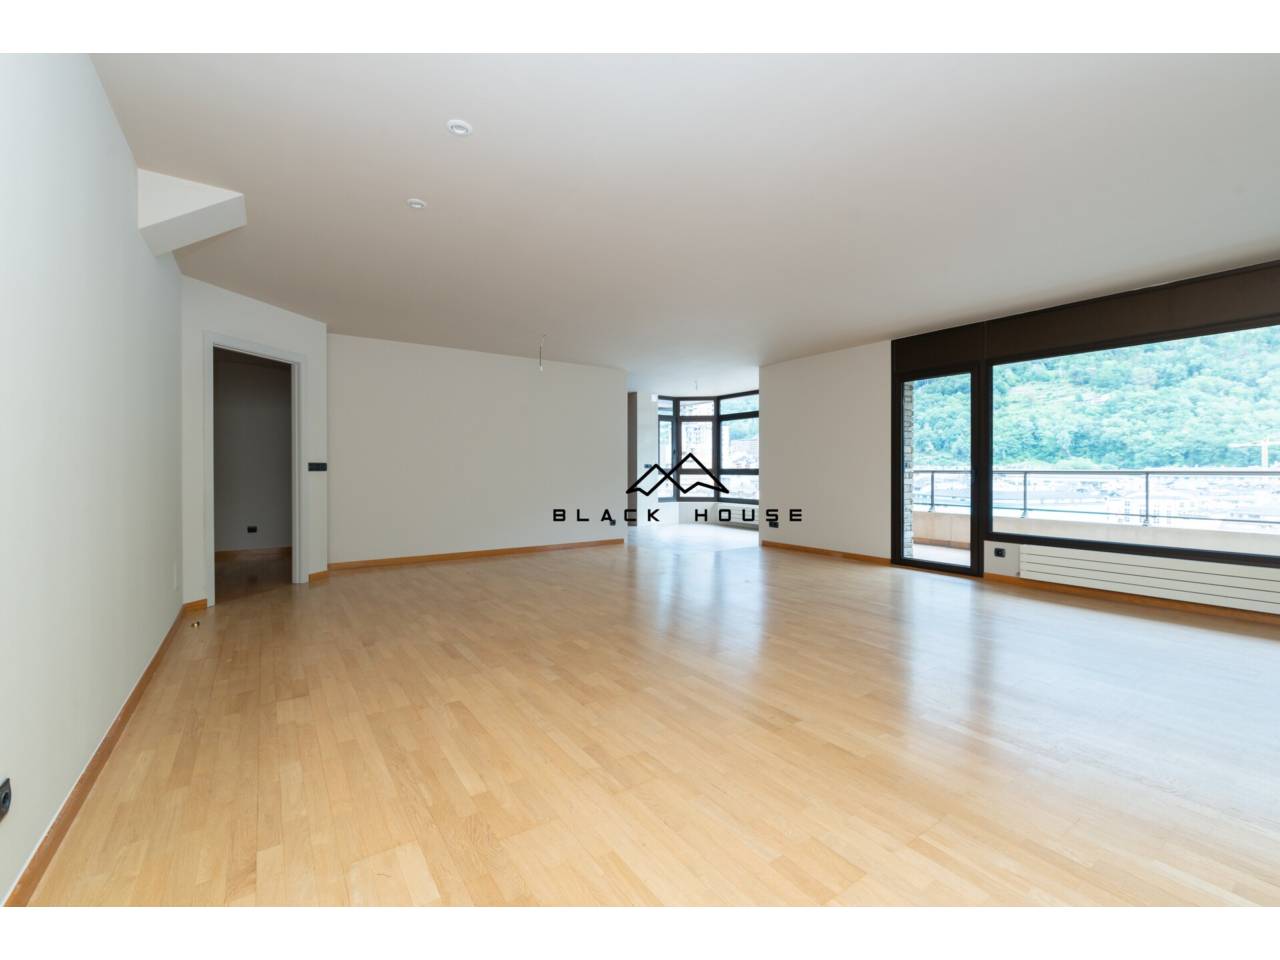 Luxurious penthouse for rent in Andorra la Vella.